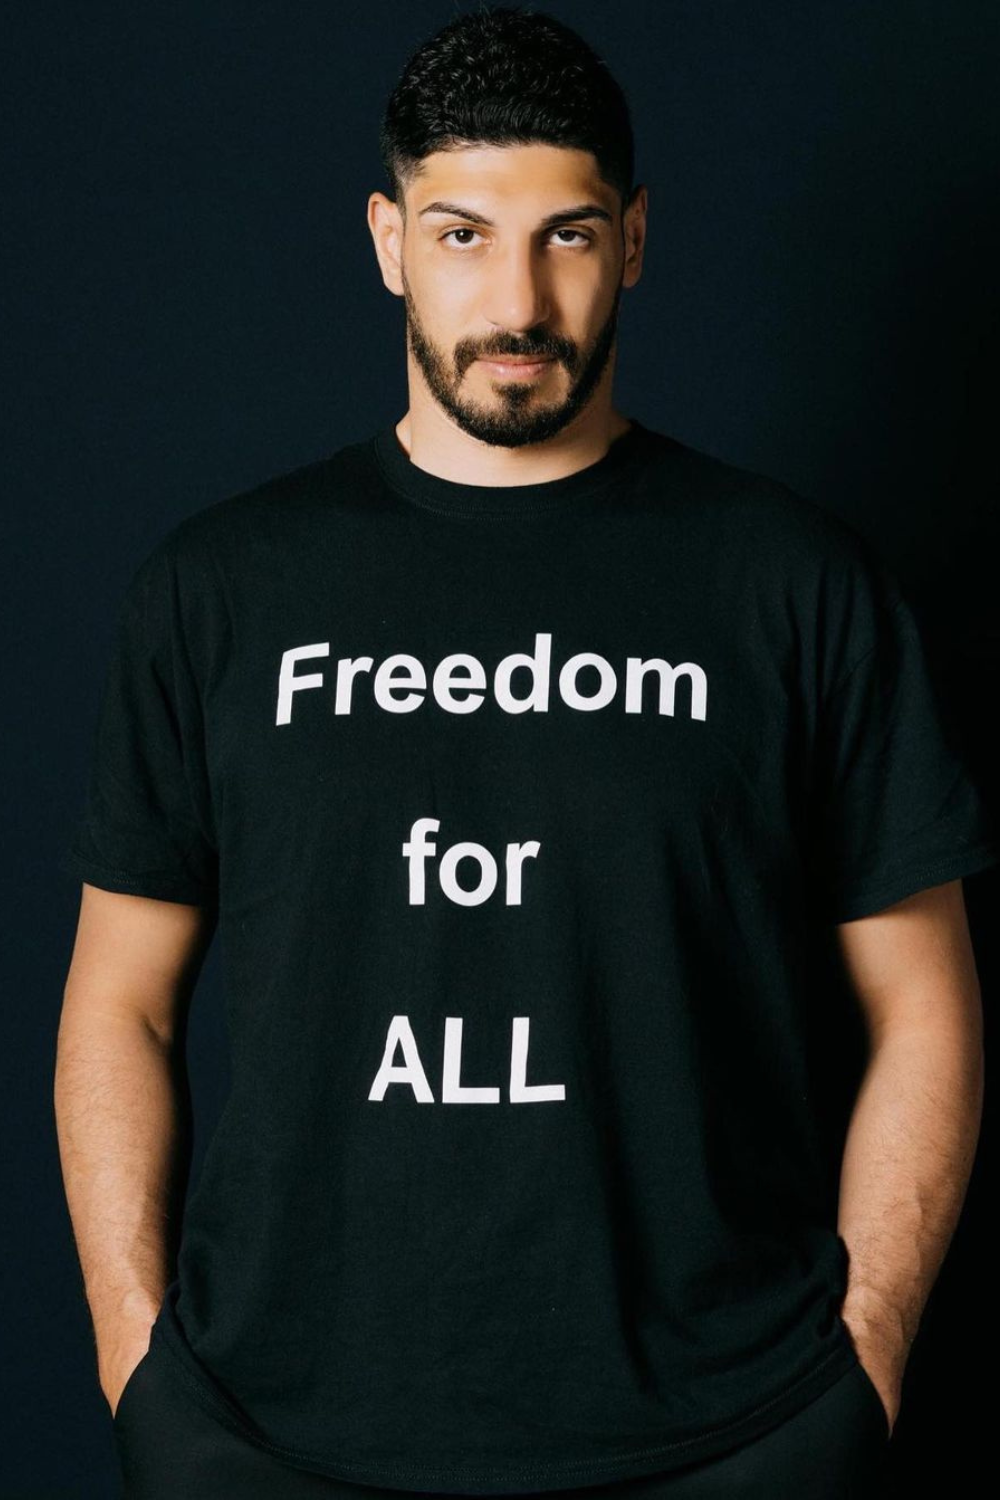 Enes Kanter Freedom, A Professional Basketball Player And An Activist